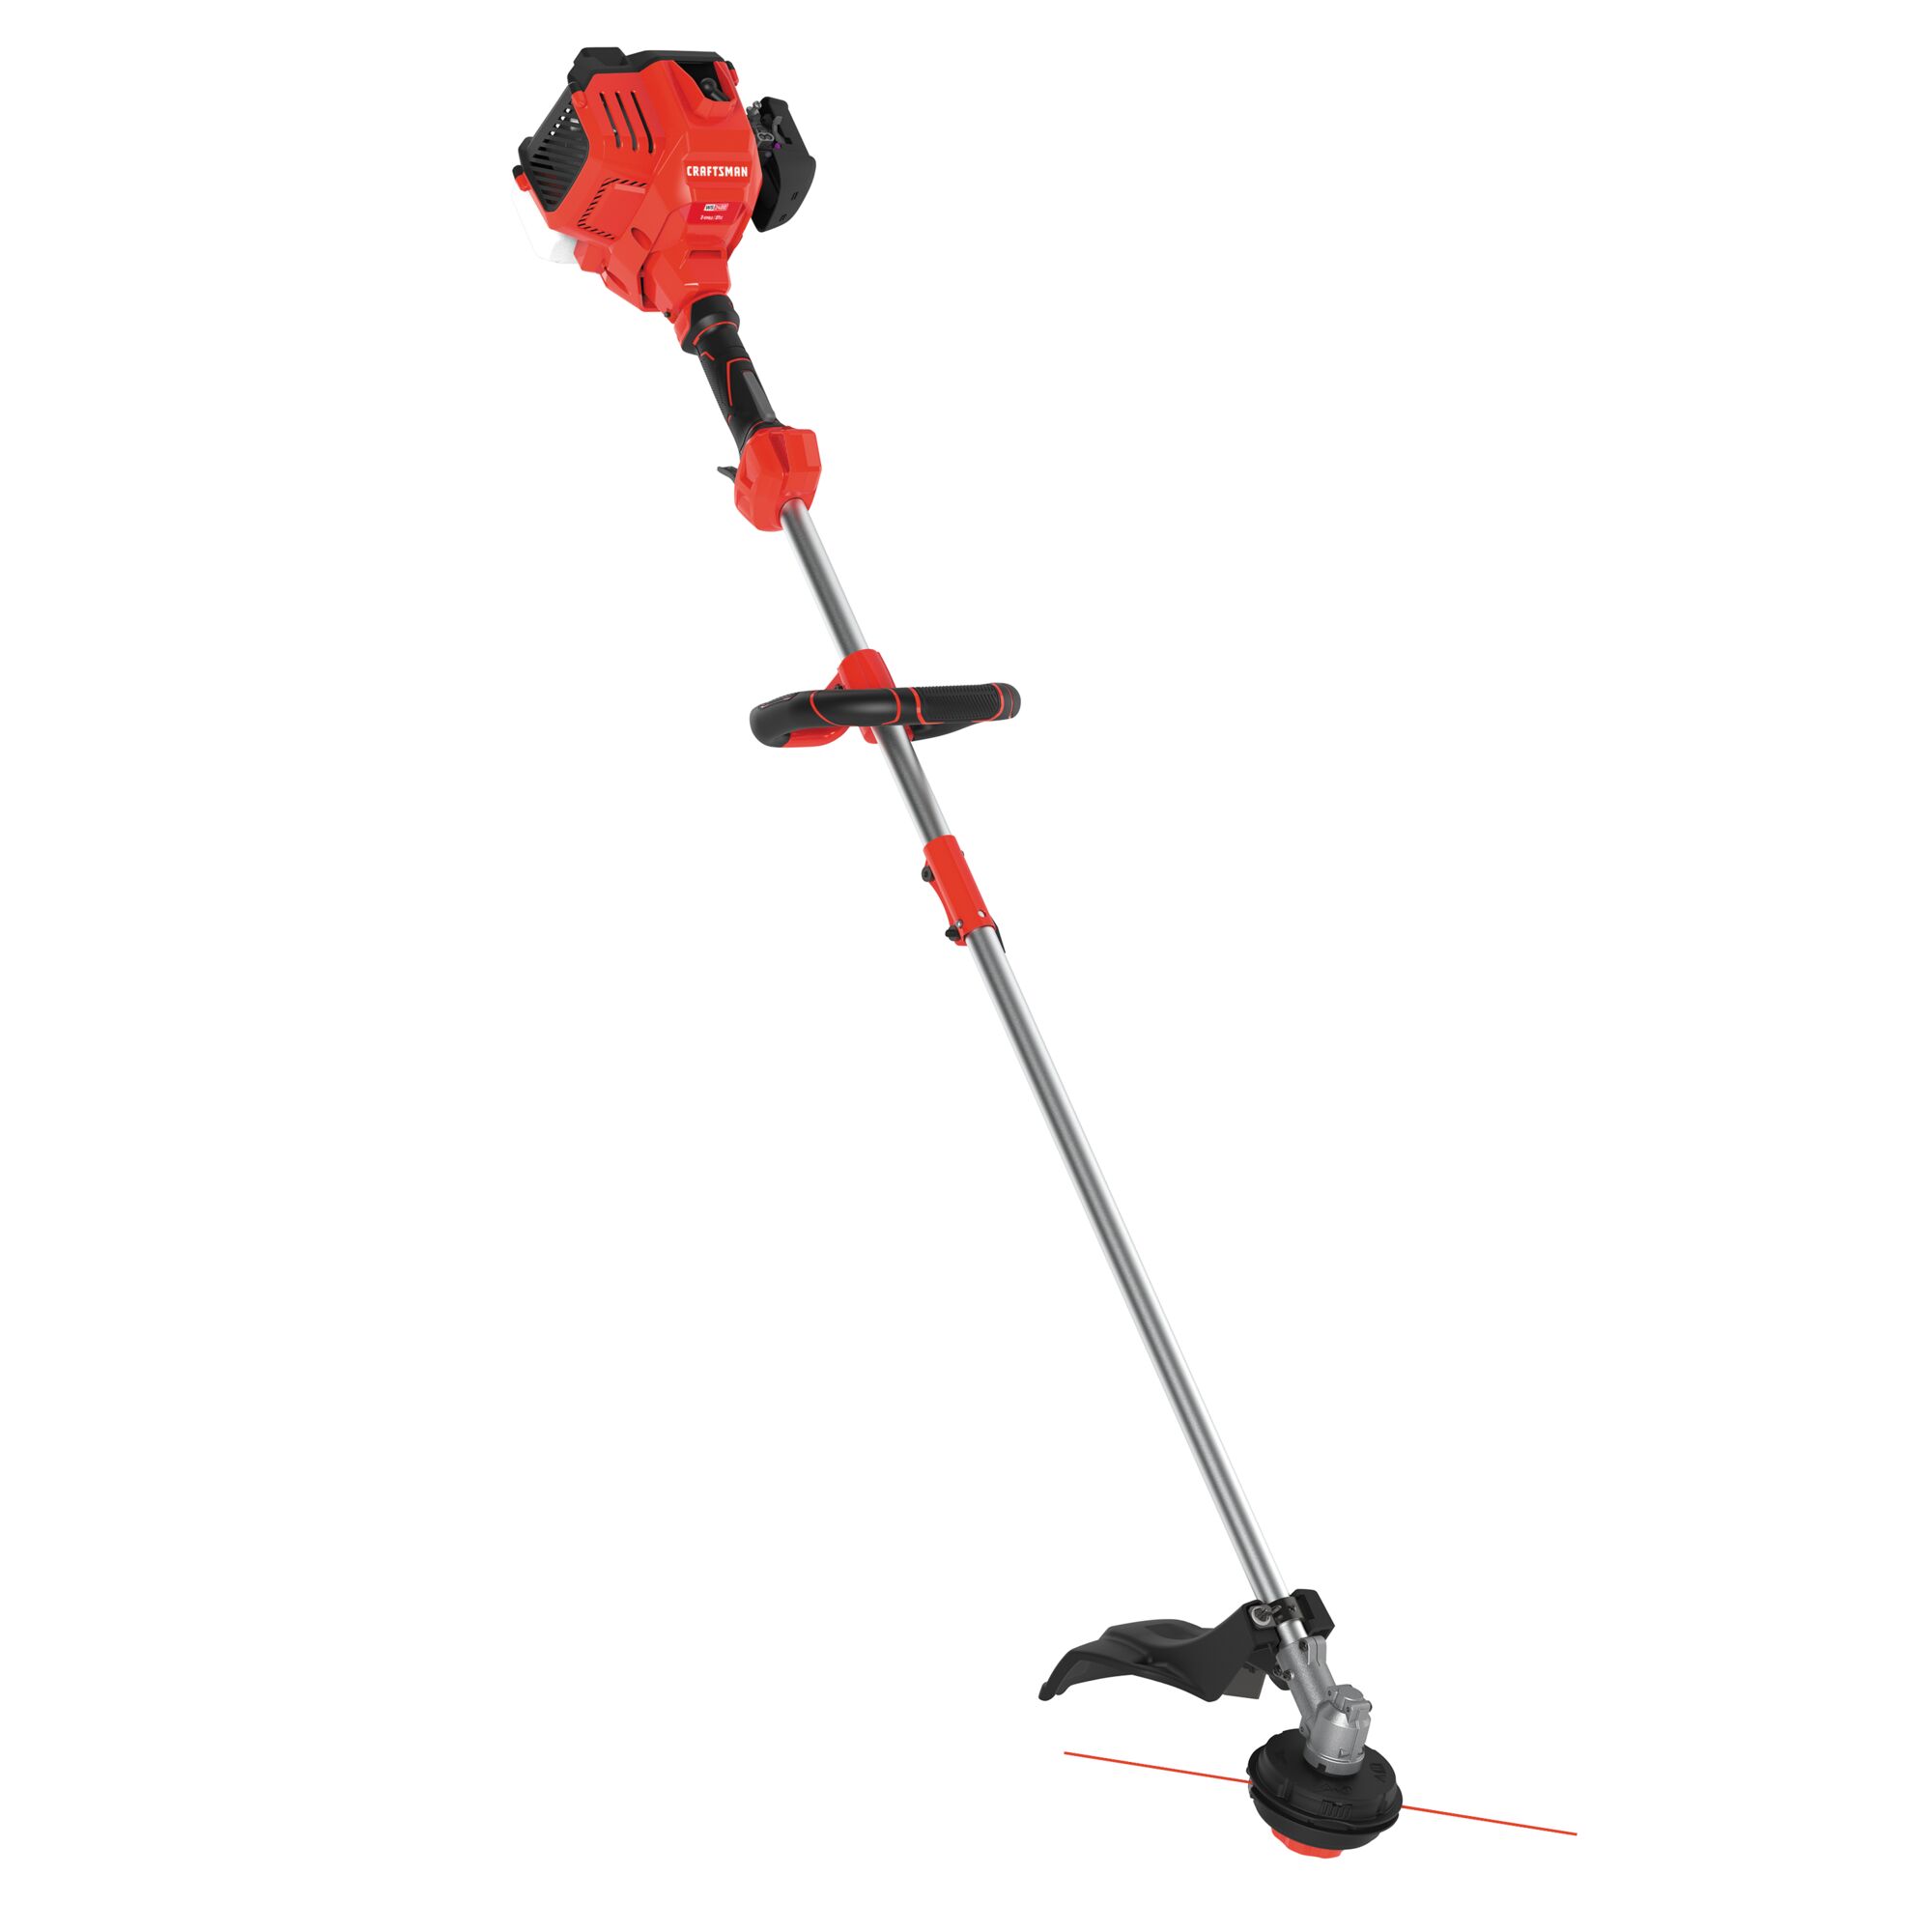 Left profile of  Weedwacker 27 C C 2 cycle 18 inch attachment capable straight shaft gas trimmer.